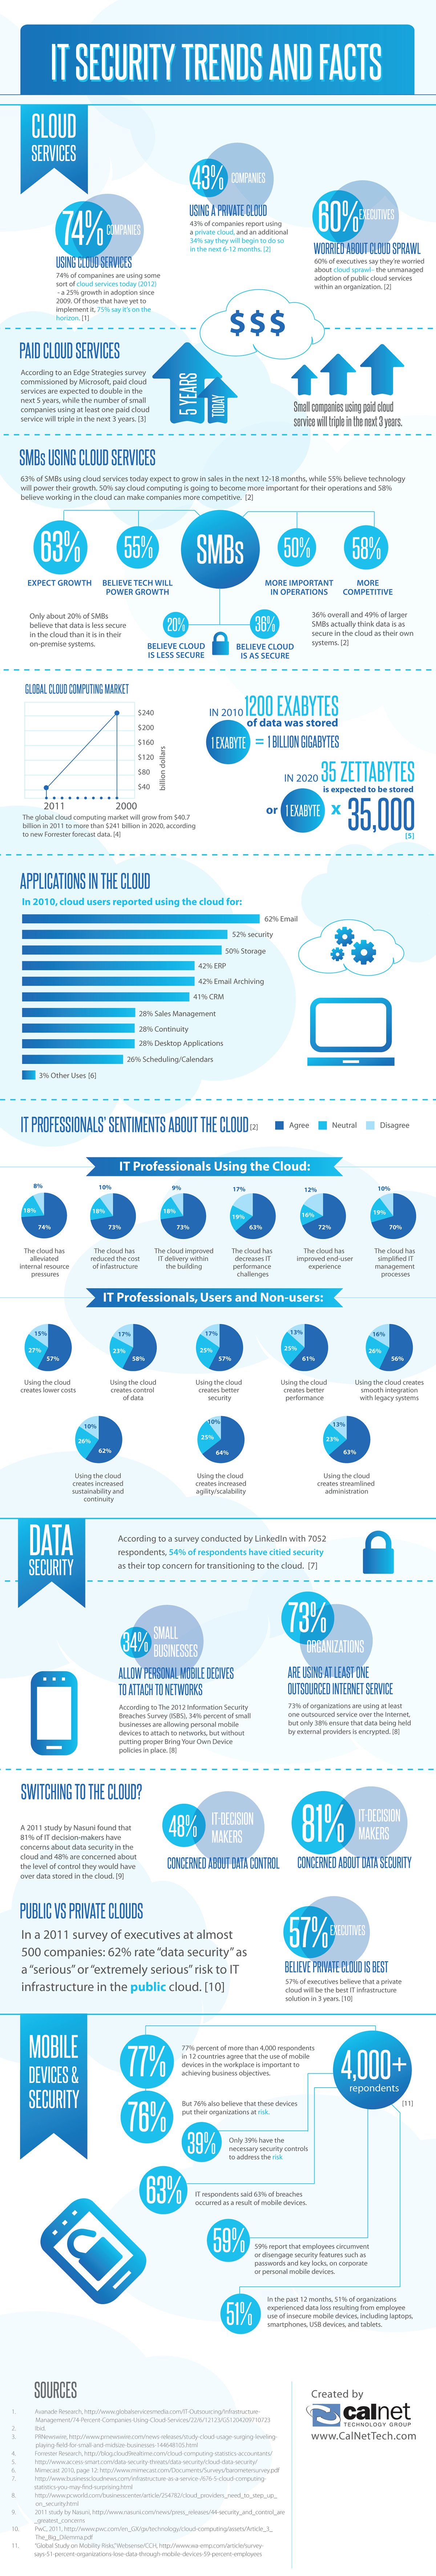 IT security cloud Technology infographic Calnet